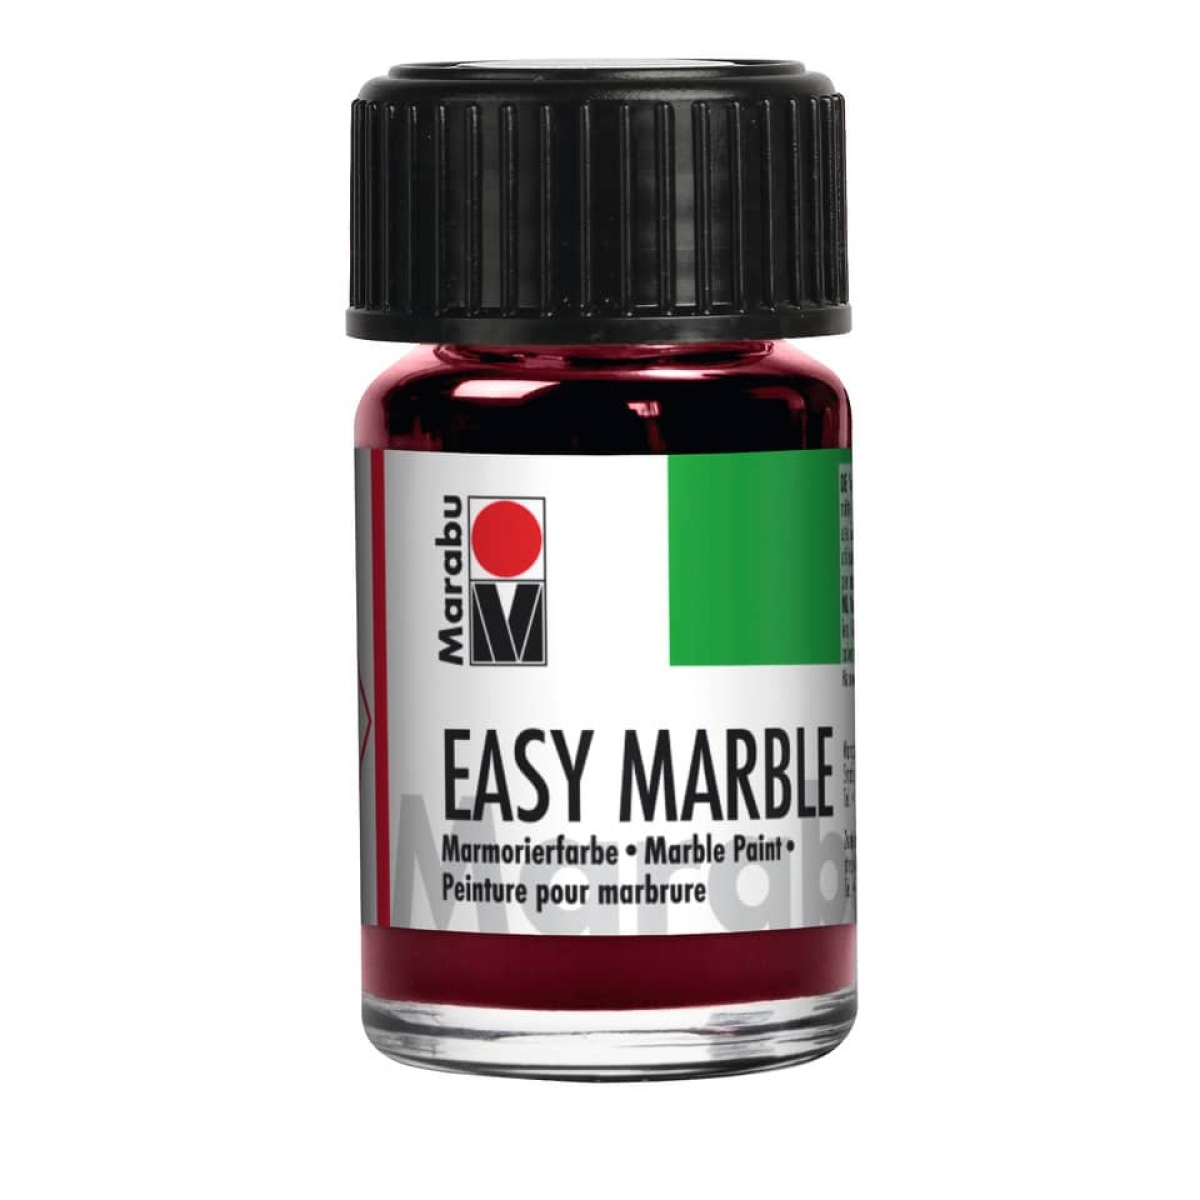 MARABUMarbling paint Easy Marble, 15ml, pink 13050 039 033Article-No: 4007751088956